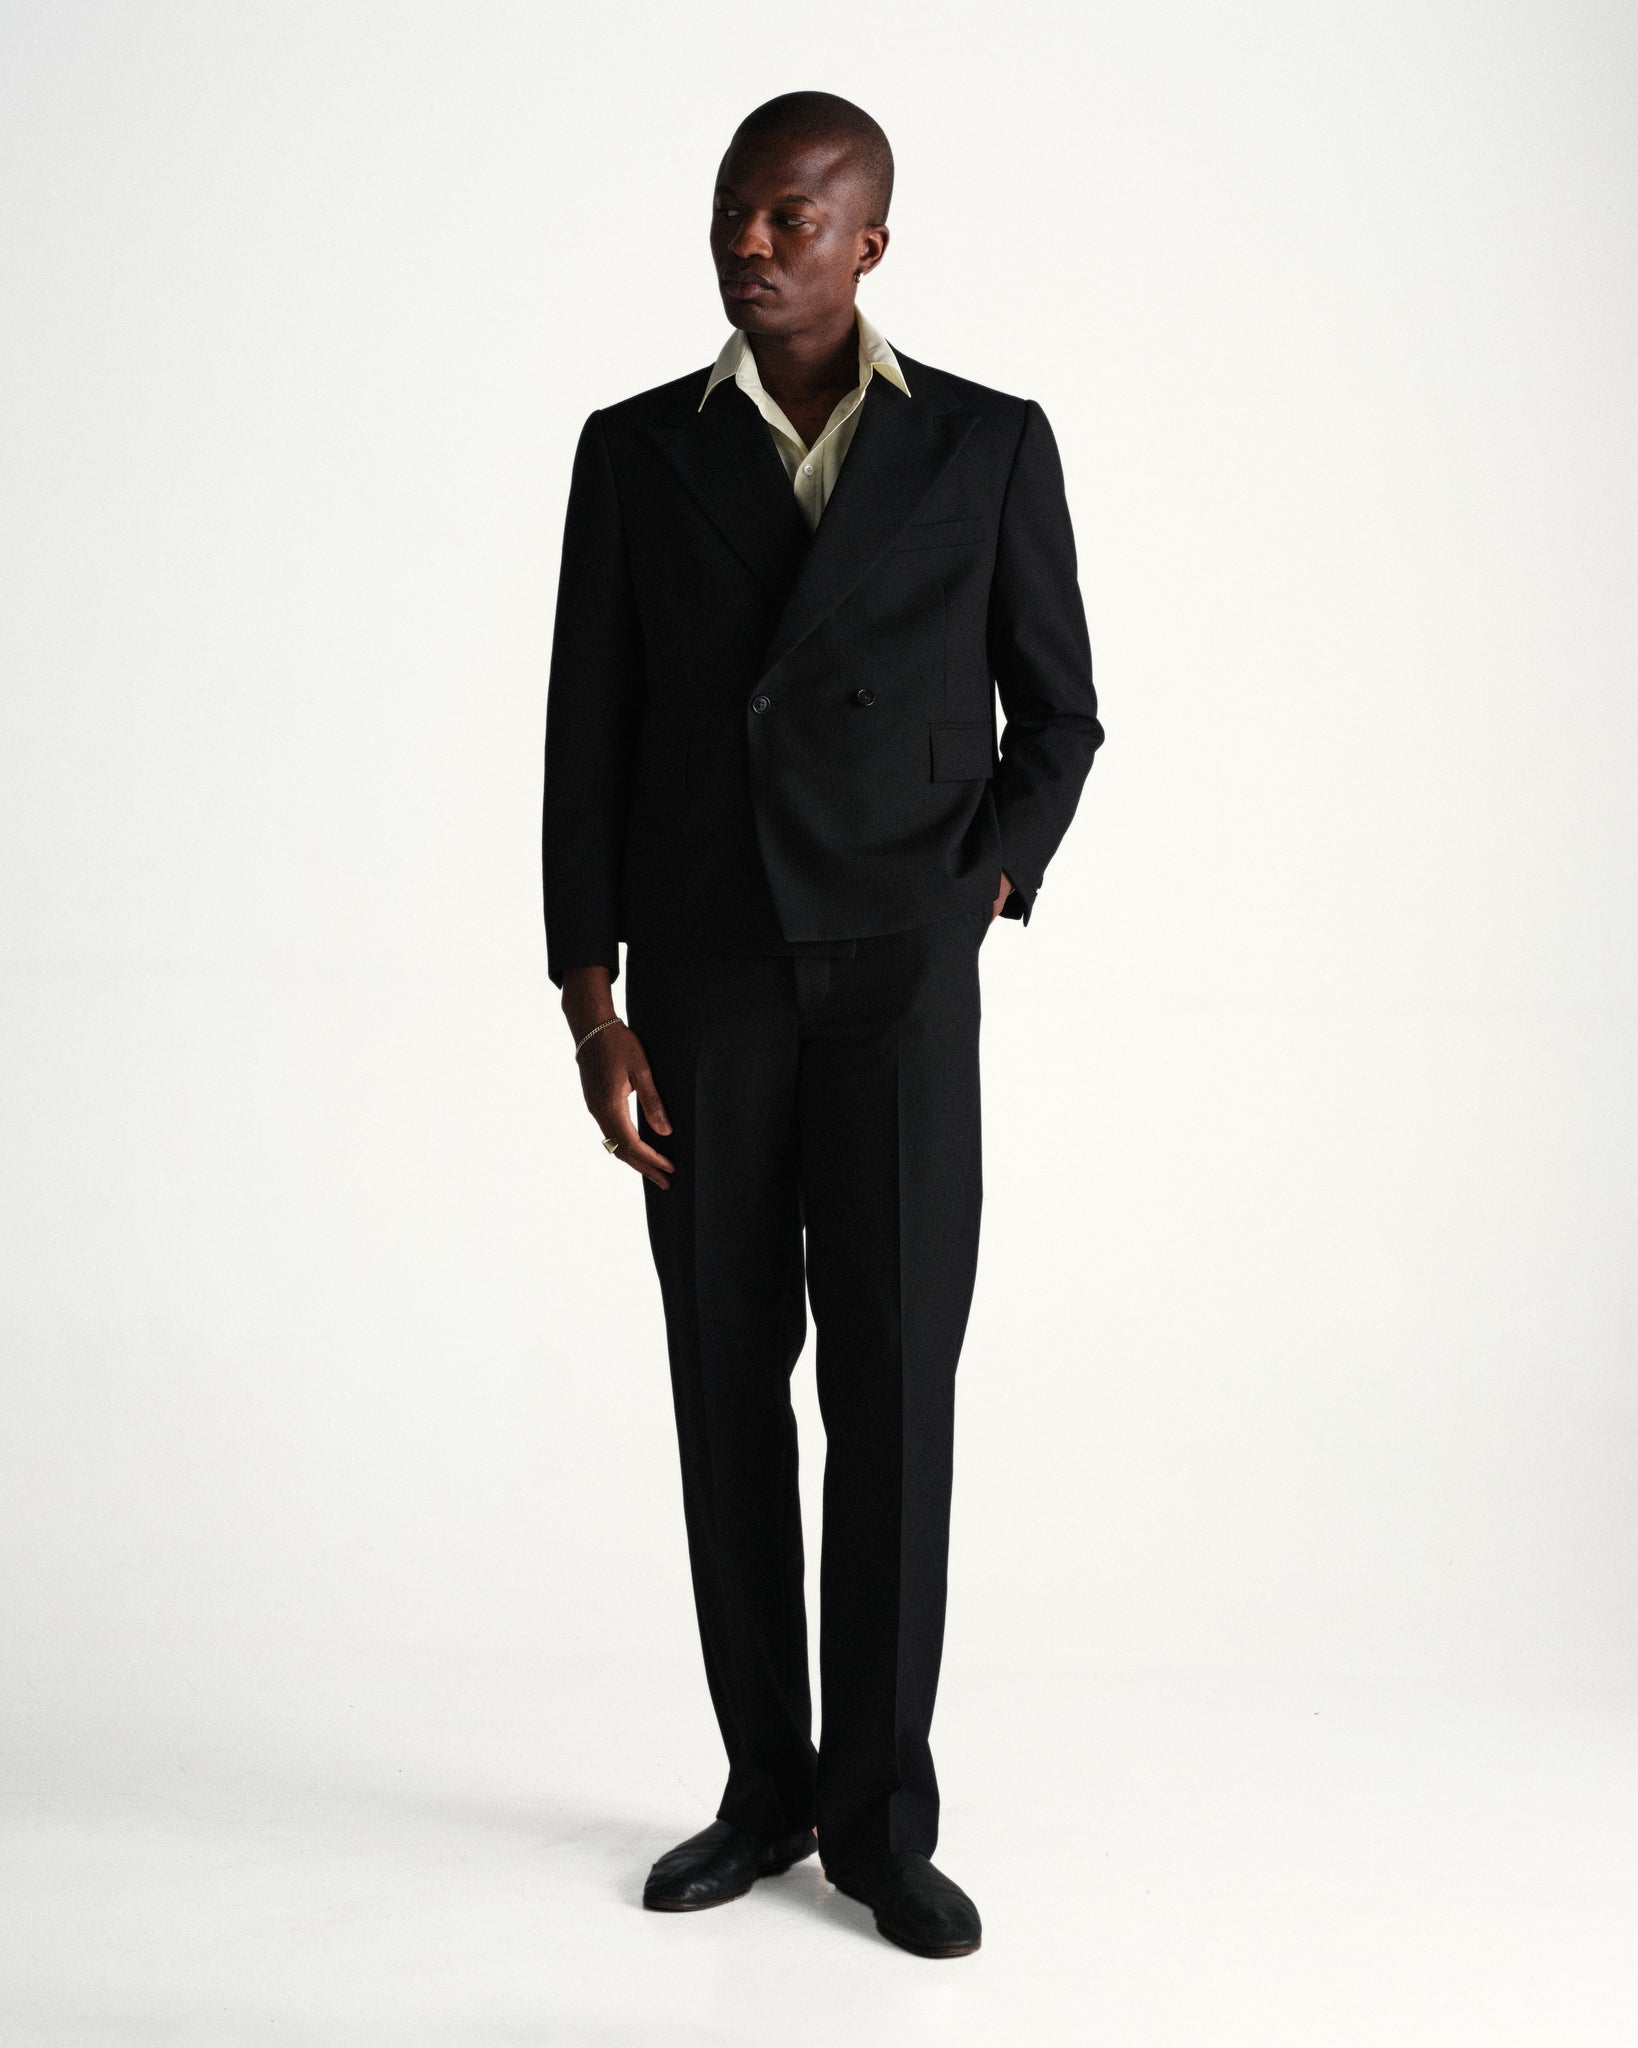 flat front suiting trousers - black